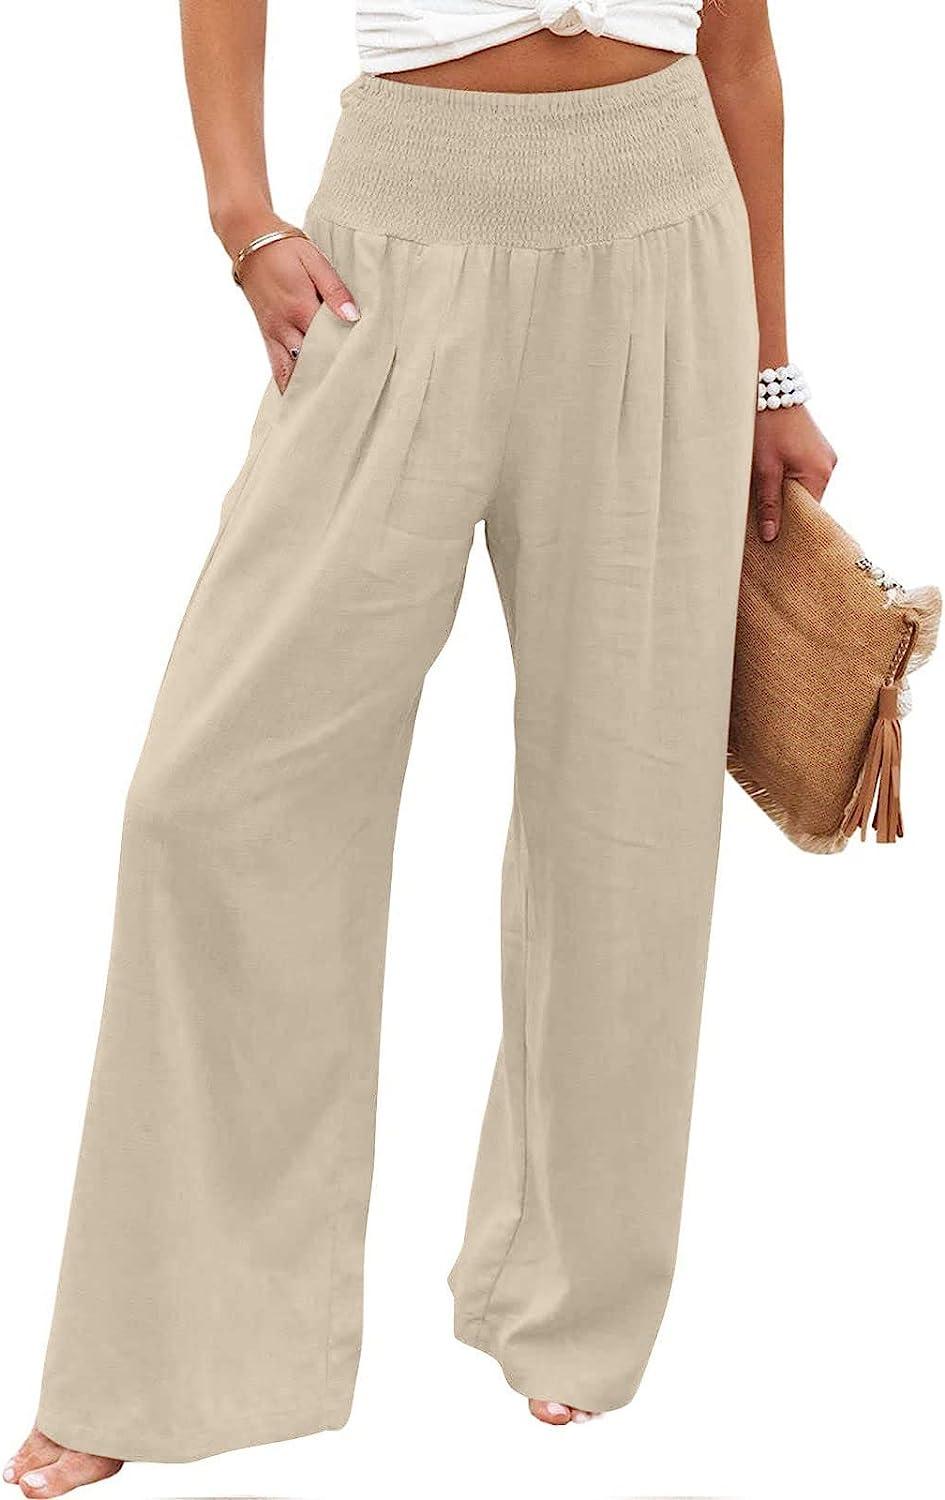 Capri Pants for Women Summer Casual Drawstring Lounge Linen Pants with  Pockets Plus Size High Waist Straight Trousers